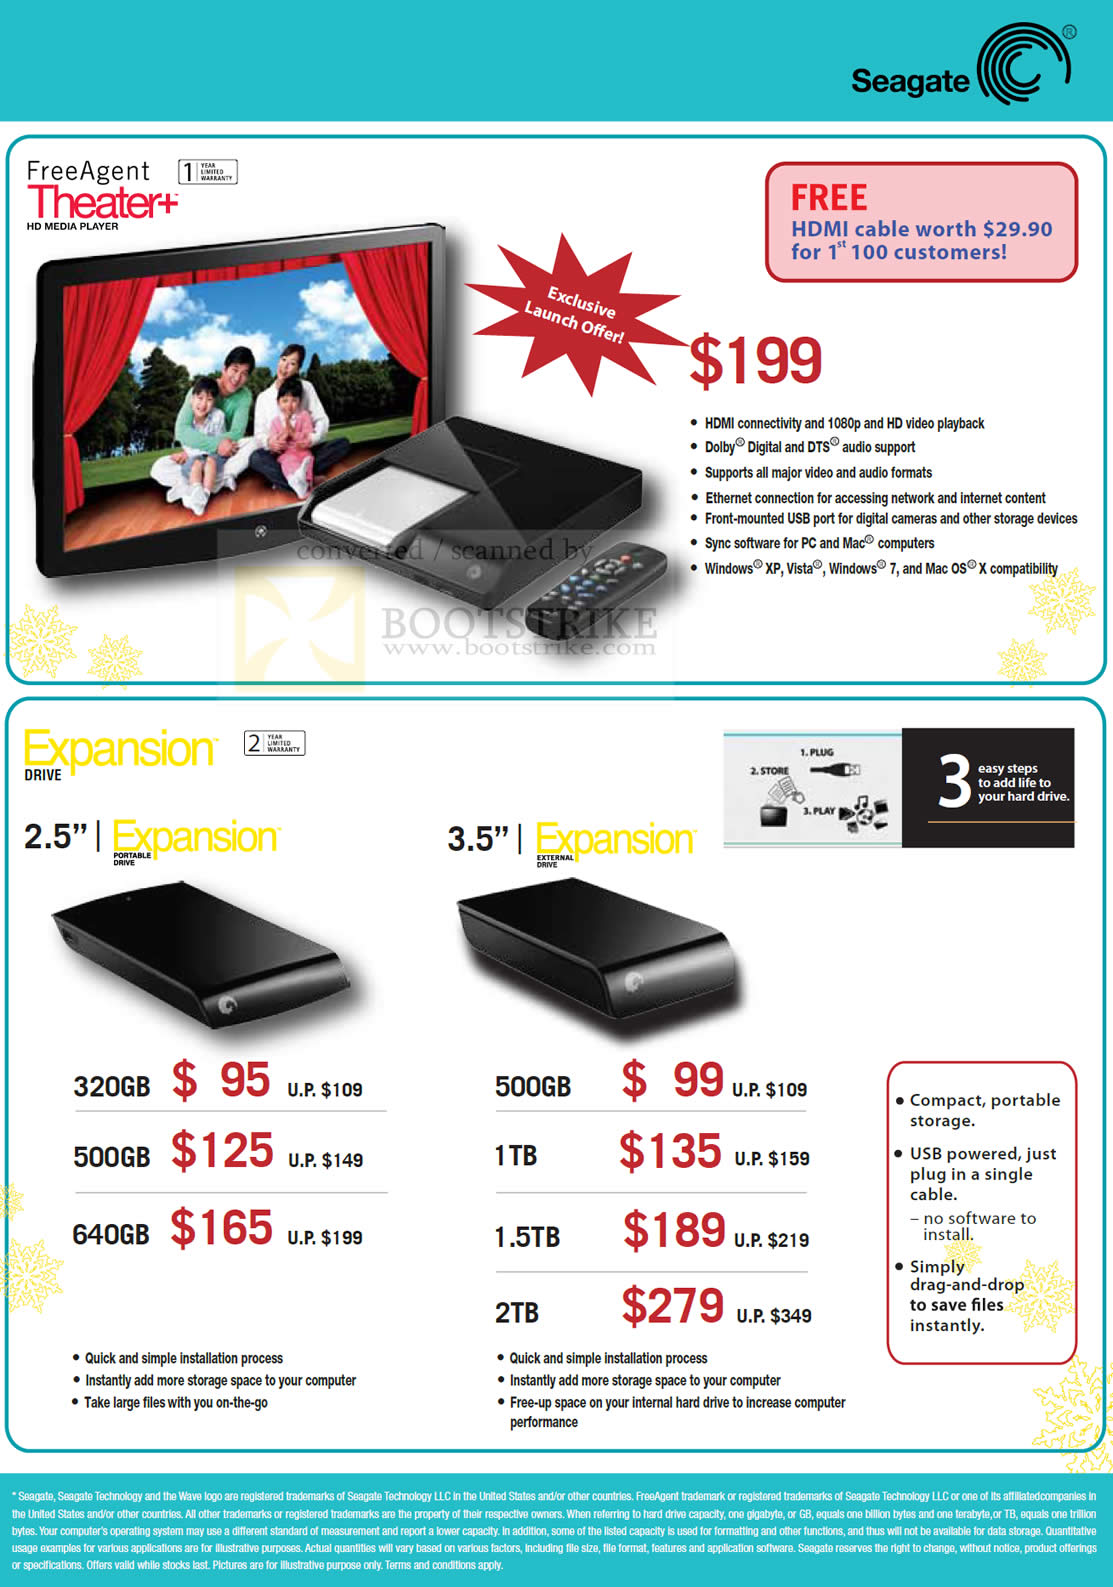 Sitex 2009 price list image brochure of Seagate FreeAgent Theater Media Player Expansion Portable Drive